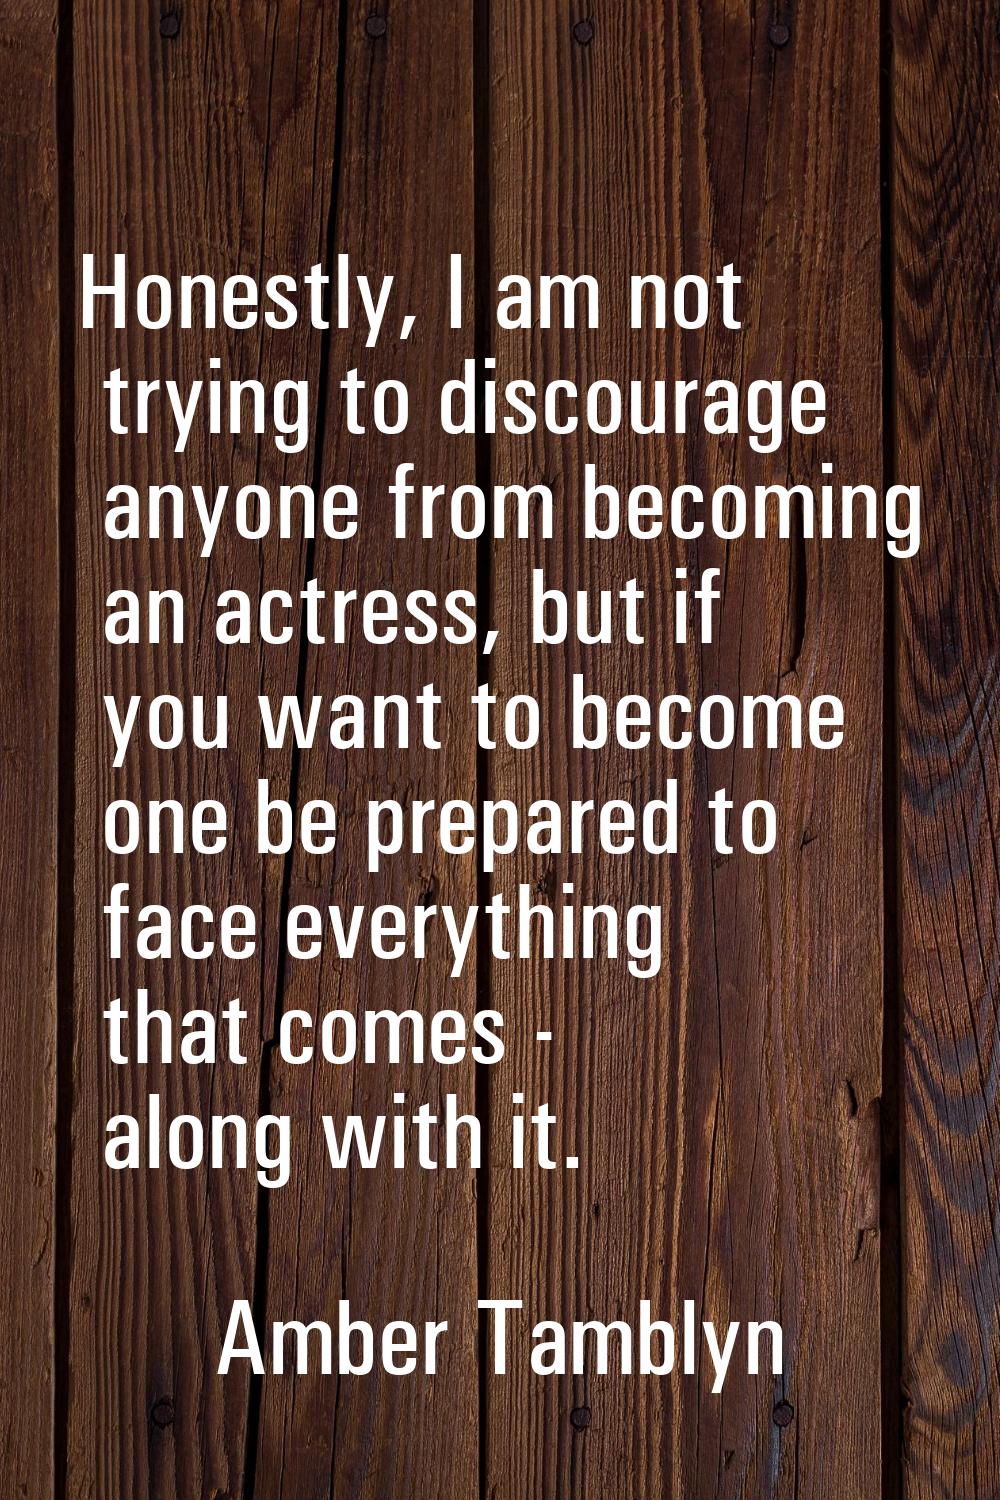 Honestly, I am not trying to discourage anyone from becoming an actress, but if you want to become 